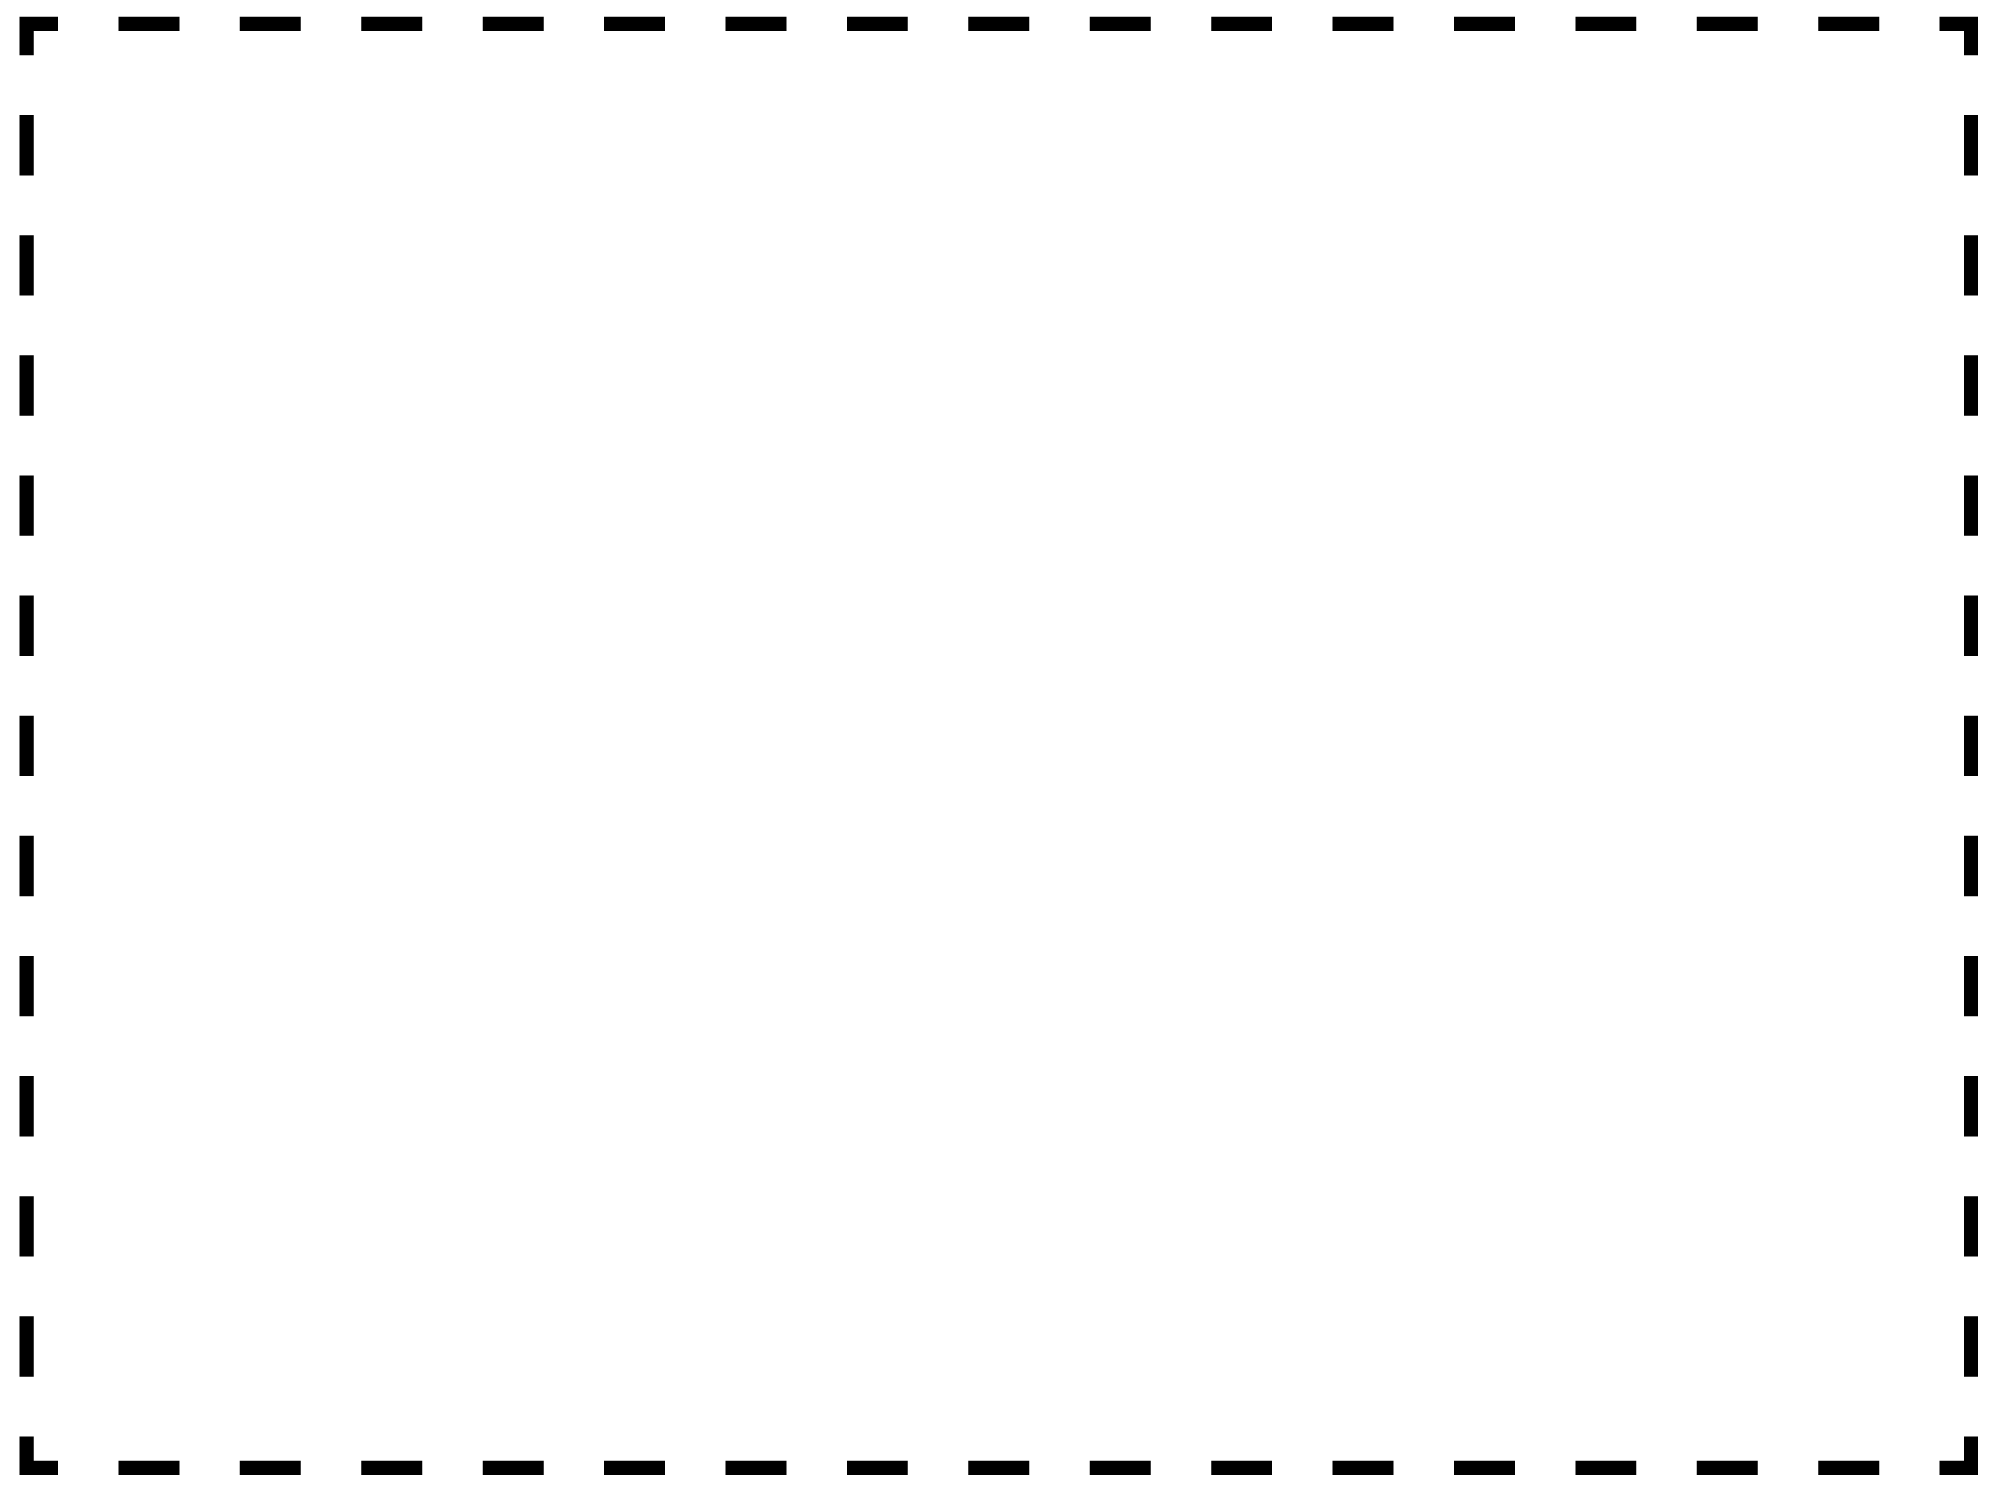 2713-coupon-outline-4x3-k-15441250345385.png